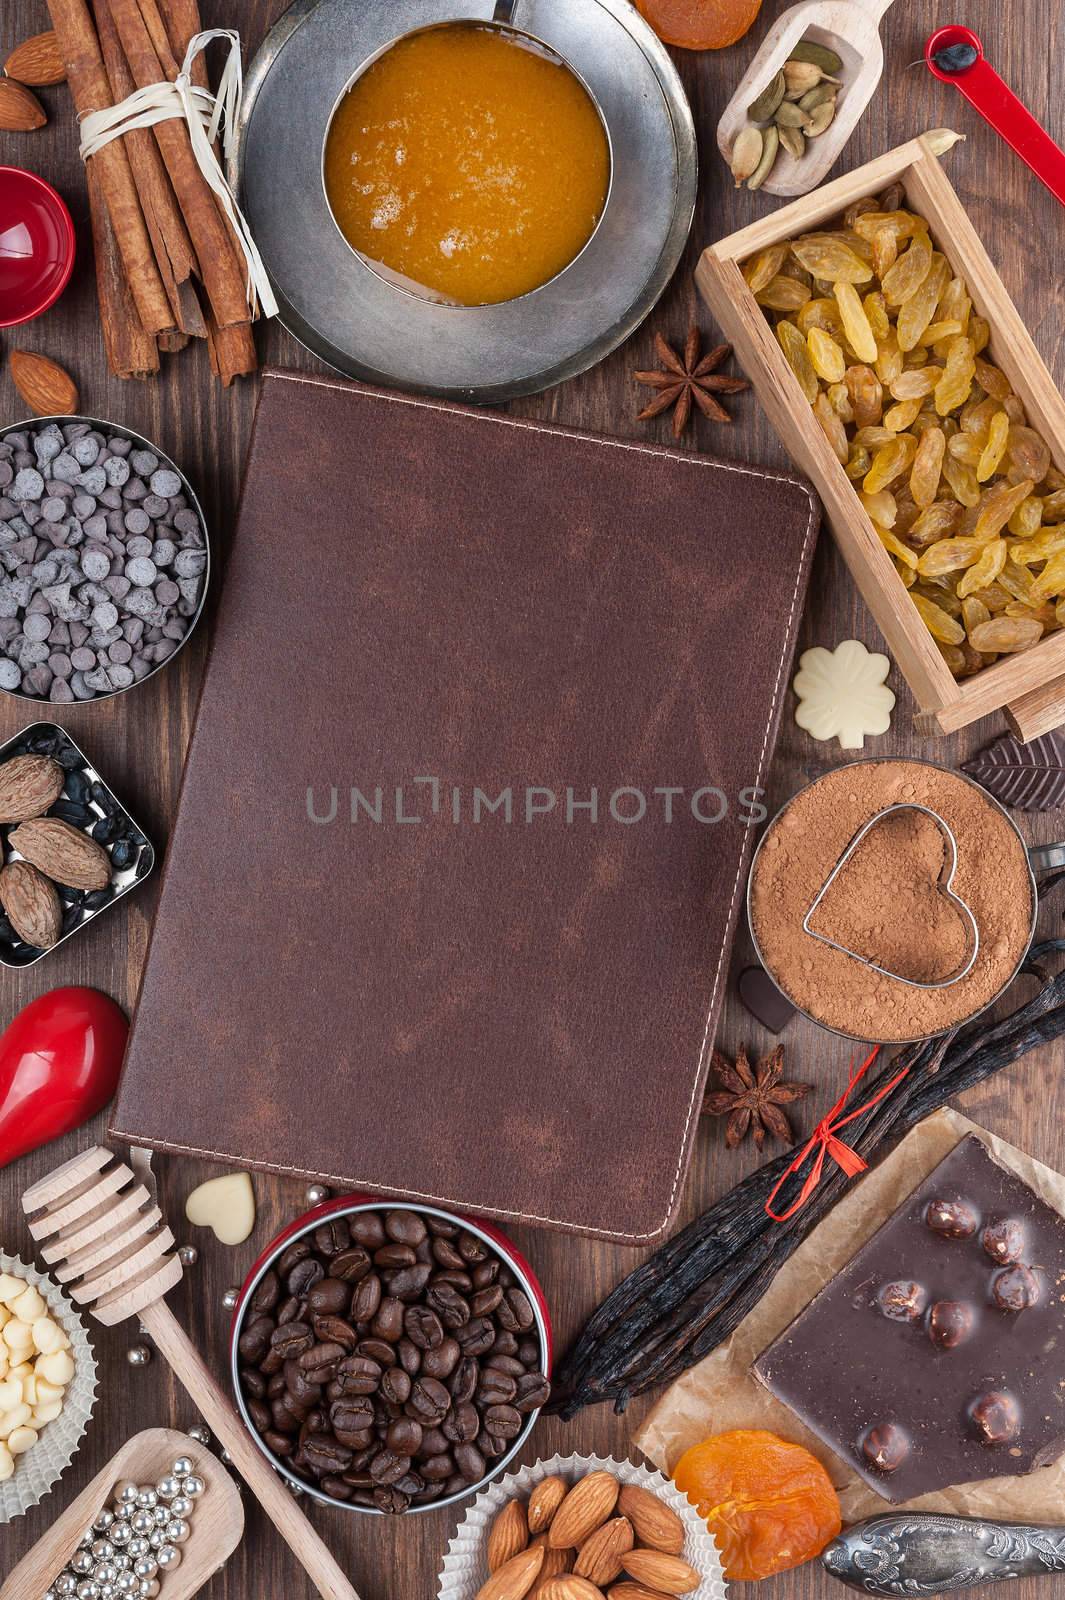 Cover of the book to write prescriptions surrounded ingredients for a sweet holiday baking